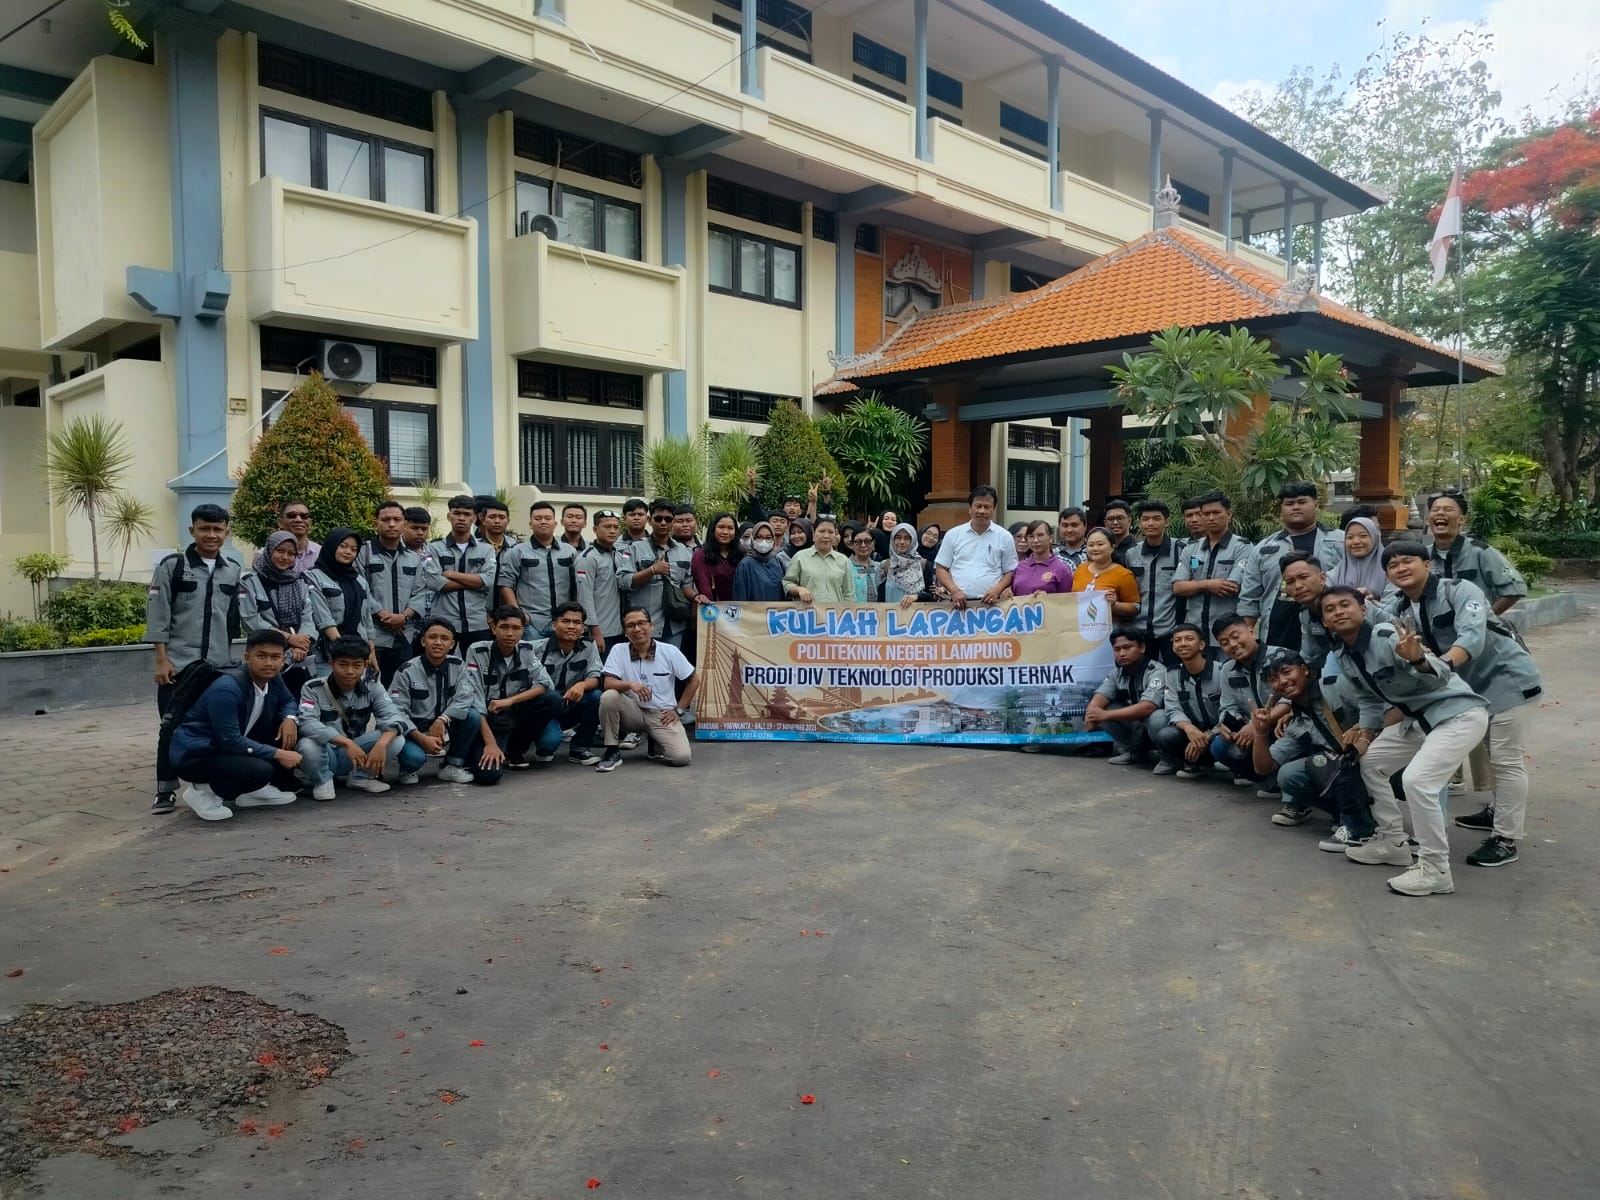 Unud Faculty of Animal Husbandry Receives Field Trip Visits from the Lampung State Polytechnic Animal Production Technology Study Program